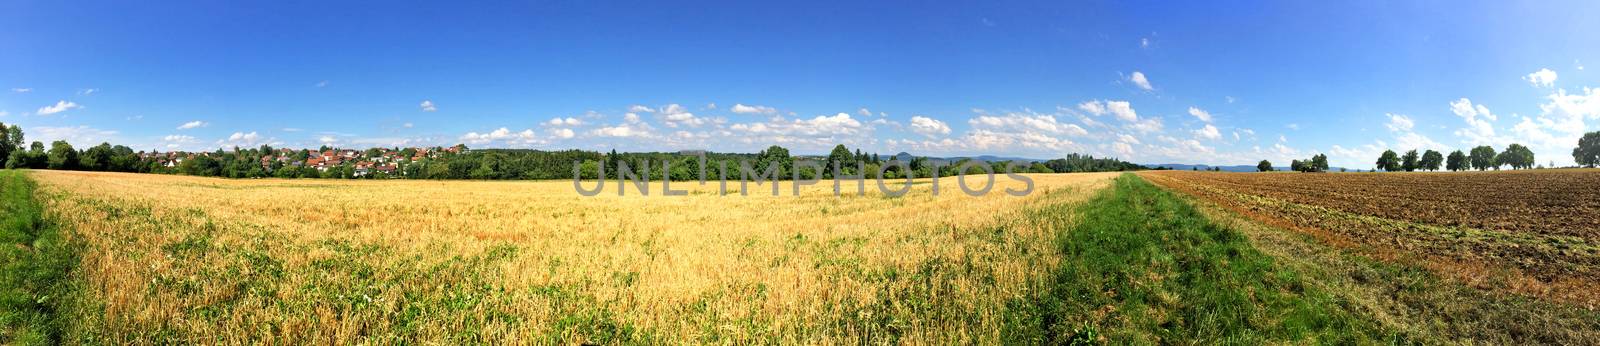 panoramic view over stubble field and acre in summer by Jochen